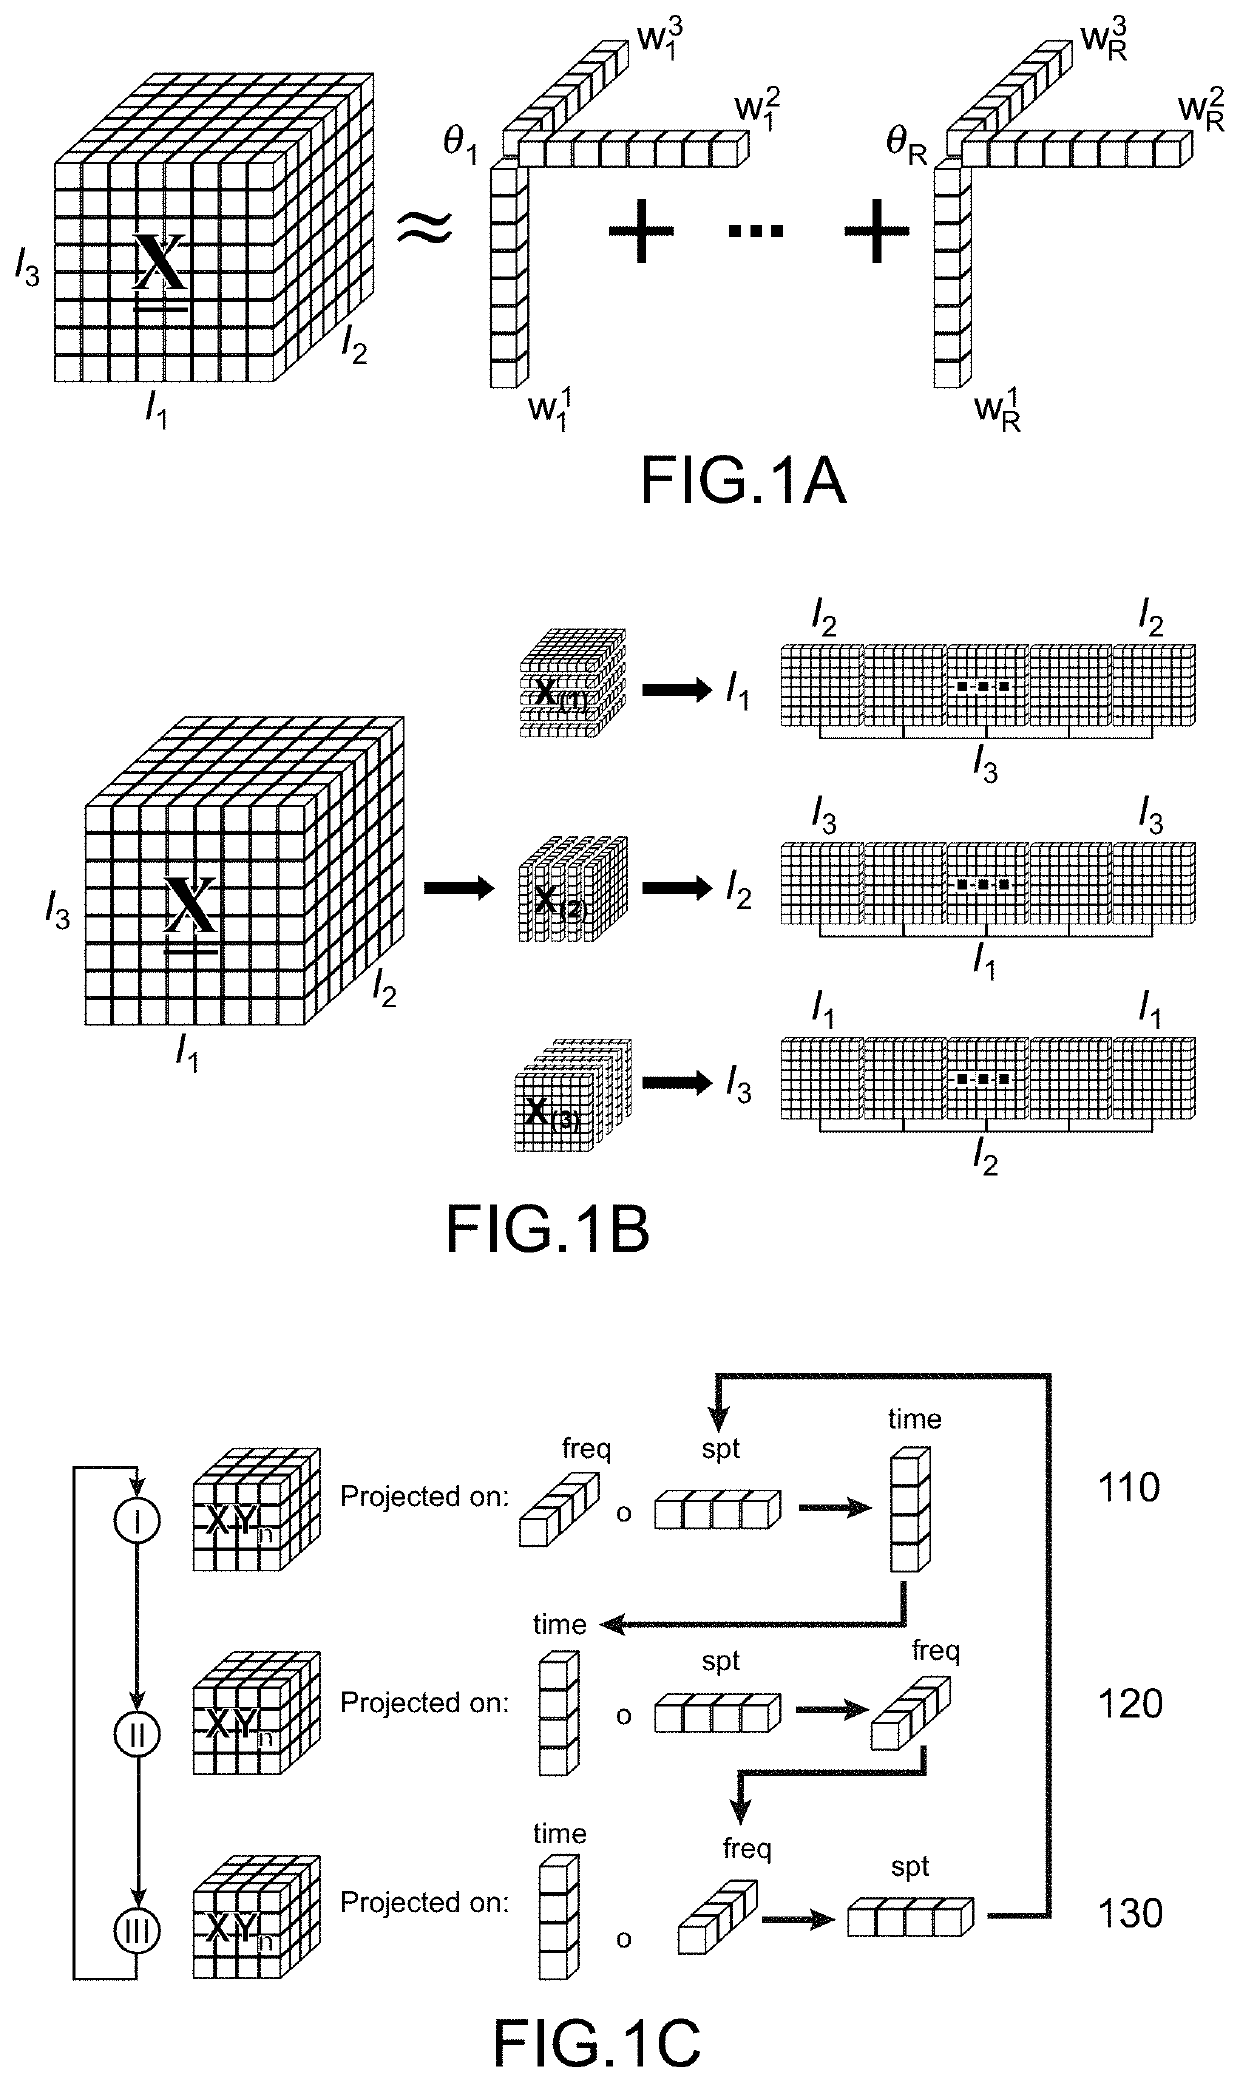 Method for calibrating on-line and with forgetting factor a direct neural interface with penalised multivariate regression